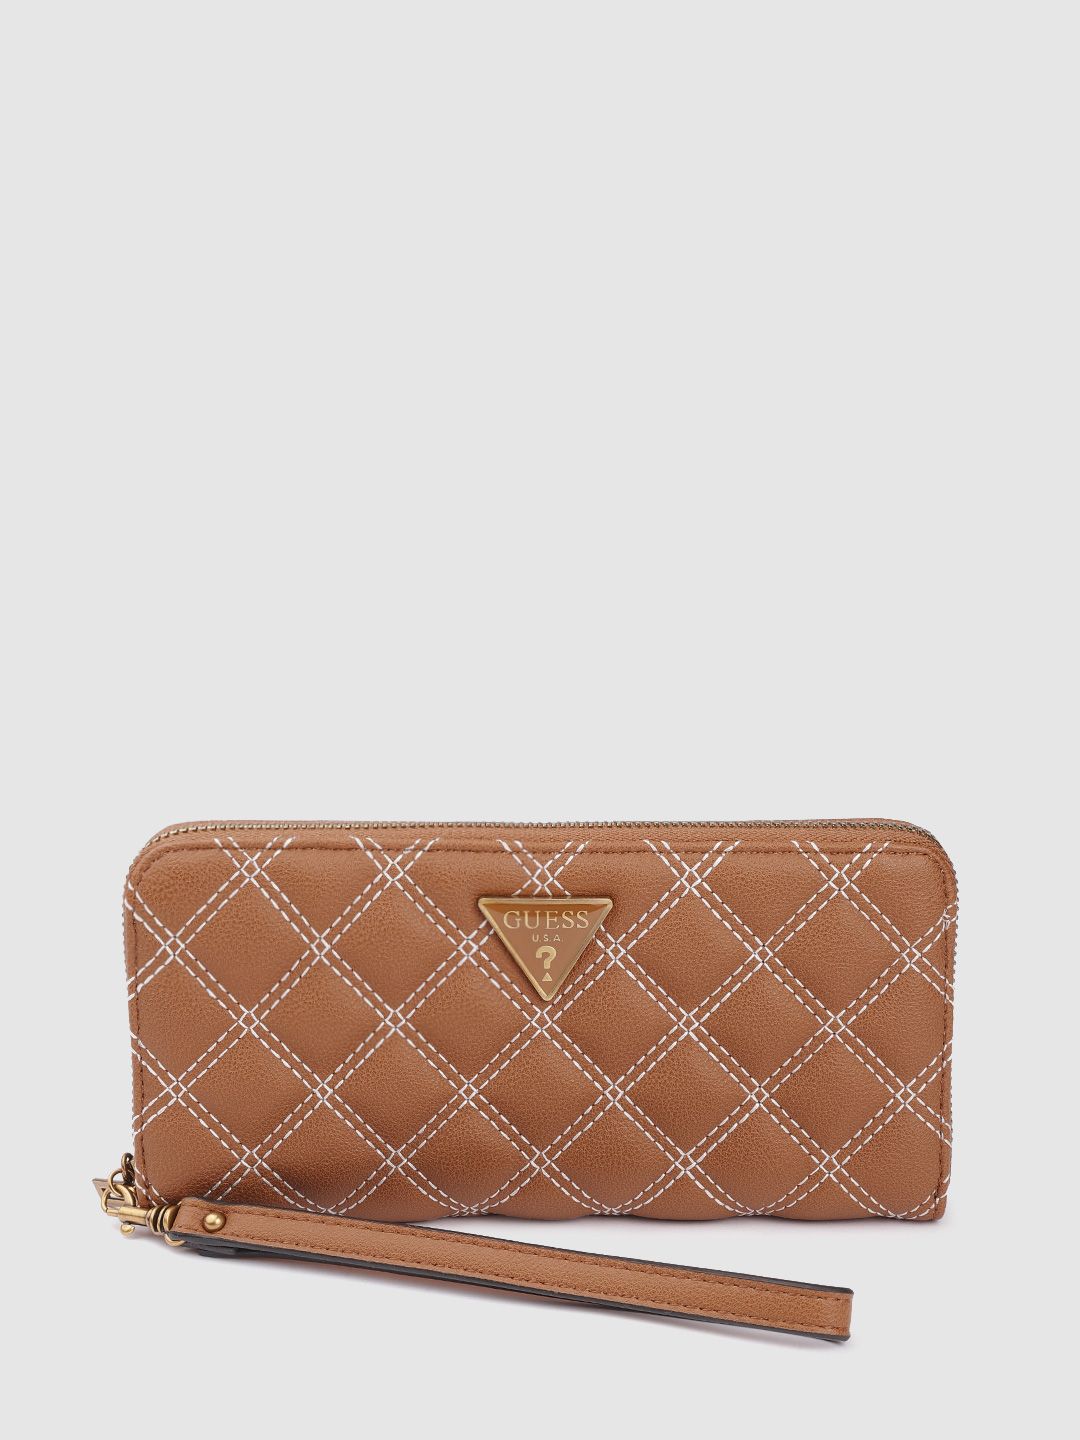 GUESS Women Tan Brown Solid Quilted Zip Around Cessily Wallet with Wrist Loop Price in India